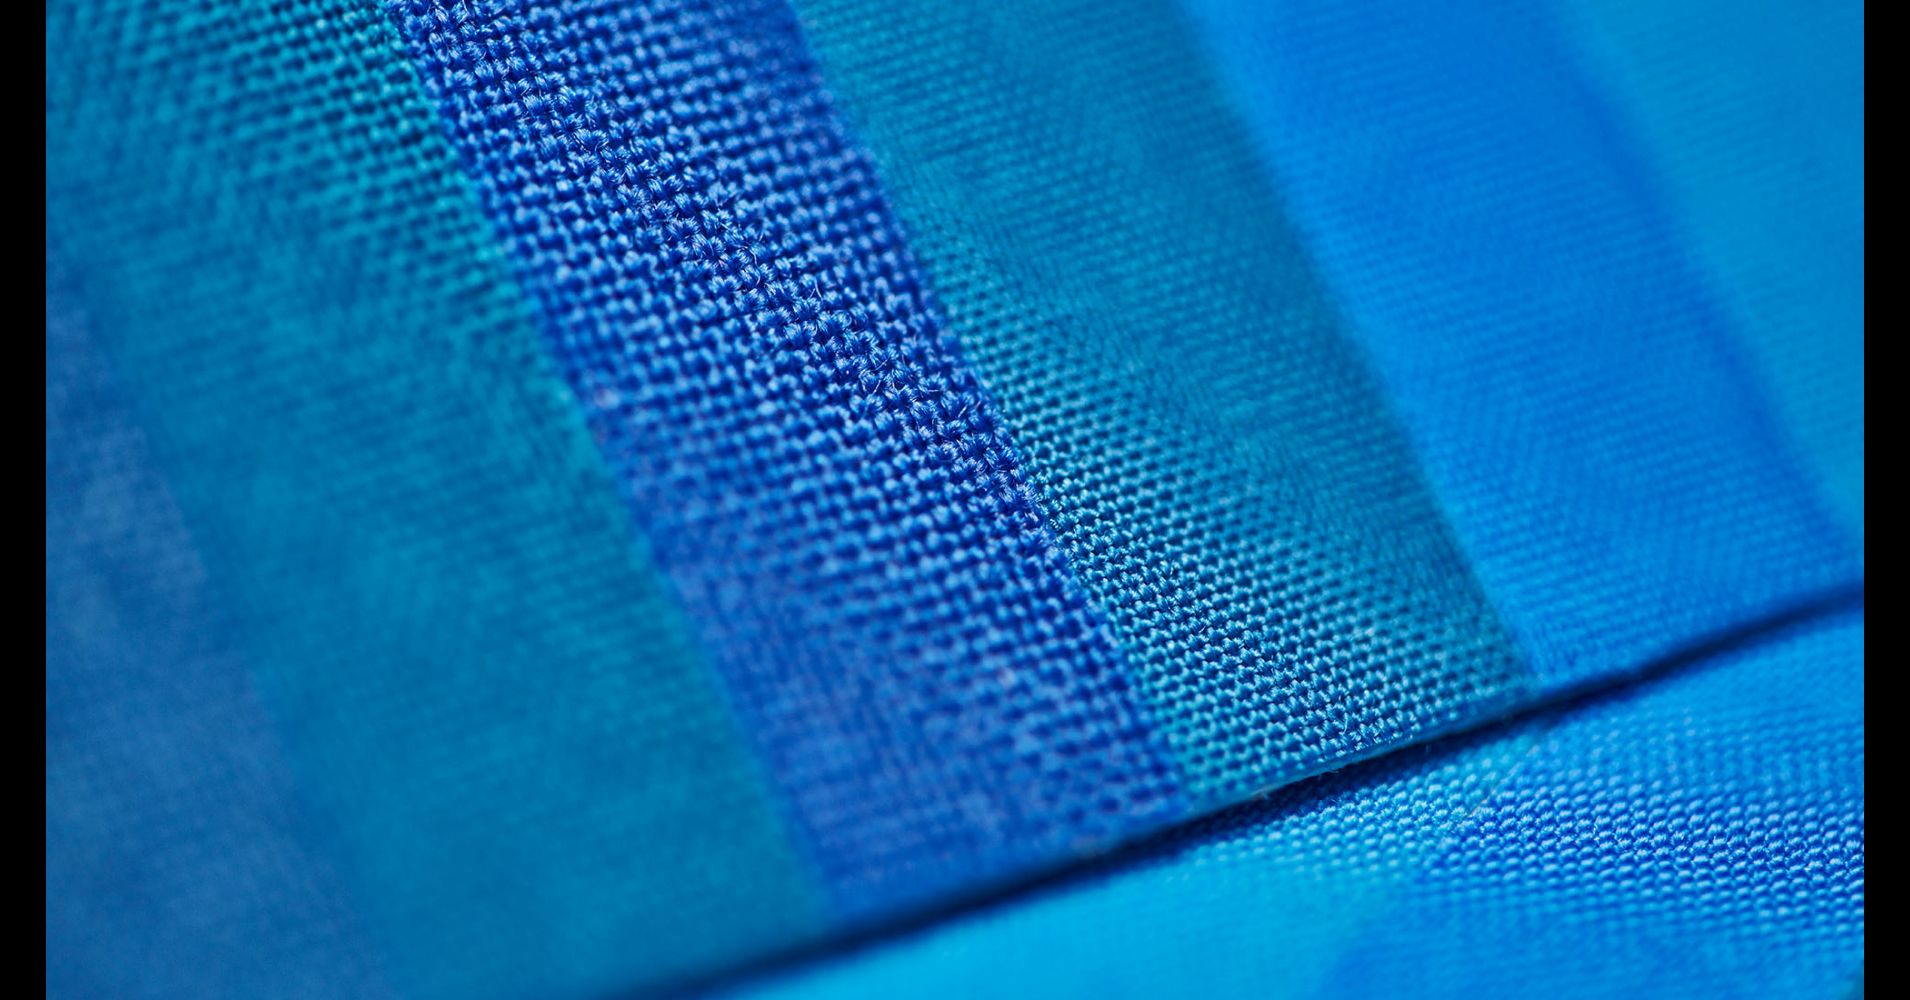 Introducing user-controlled colour-changing fabric